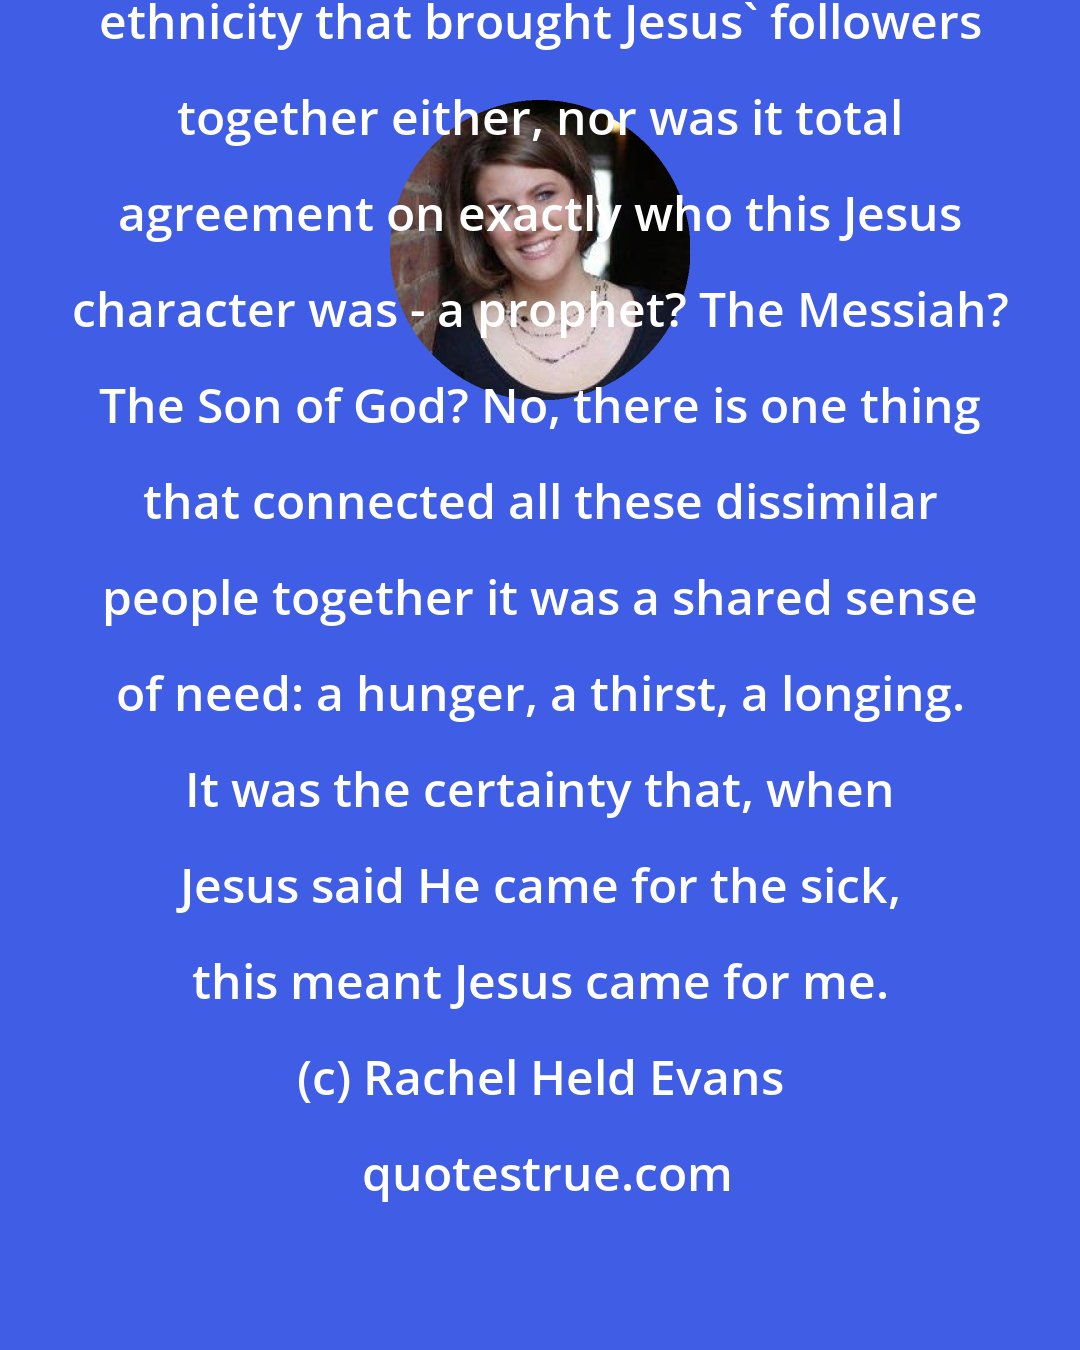 Rachel Held Evans: It wasn't shared social status or ethnicity that brought Jesus' followers together either, nor was it total agreement on exactly who this Jesus character was - a prophet? The Messiah? The Son of God? No, there is one thing that connected all these dissimilar people together it was a shared sense of need: a hunger, a thirst, a longing. It was the certainty that, when Jesus said He came for the sick, this meant Jesus came for me.